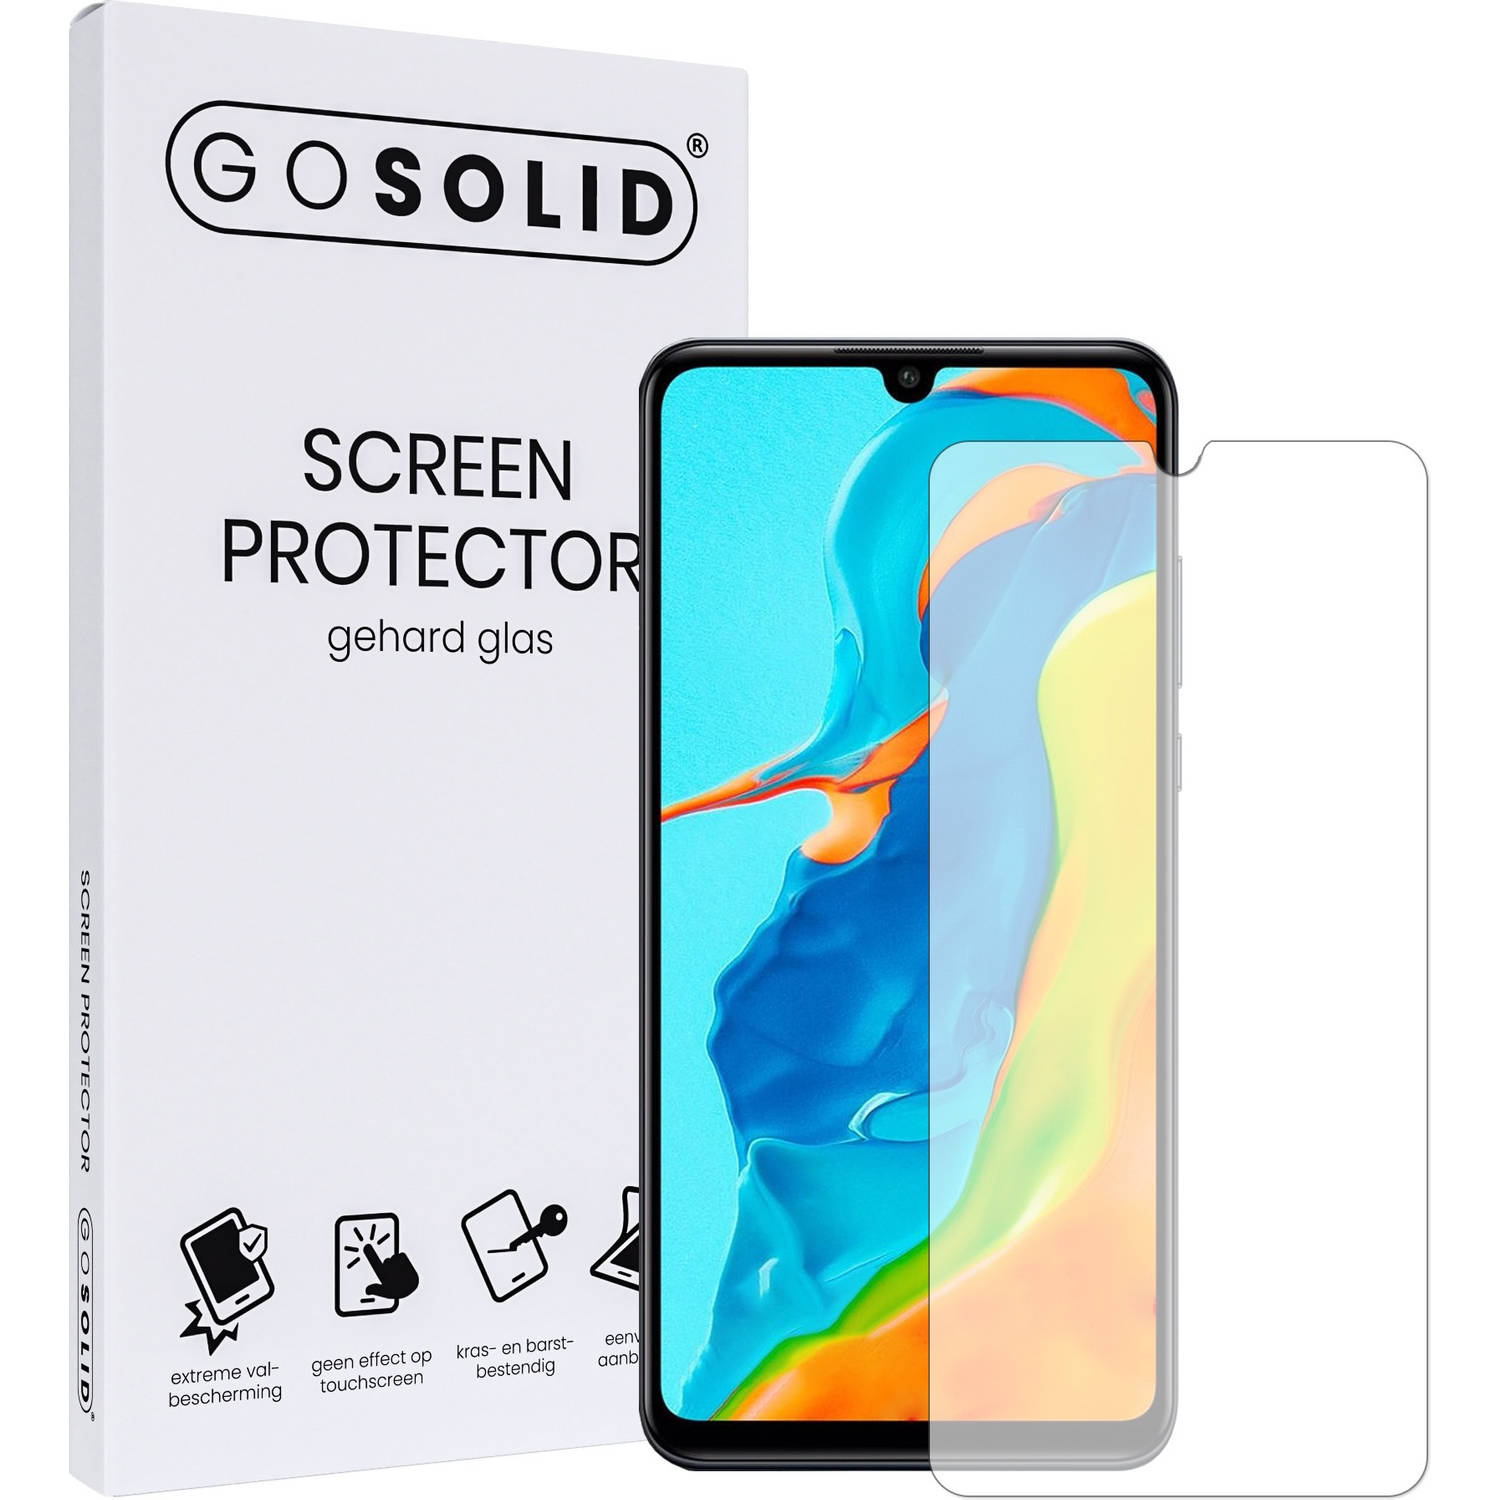 GO SOLID! Screenprotector voor Huawei Mate 30 Pro/Mate 30 Pro 5G